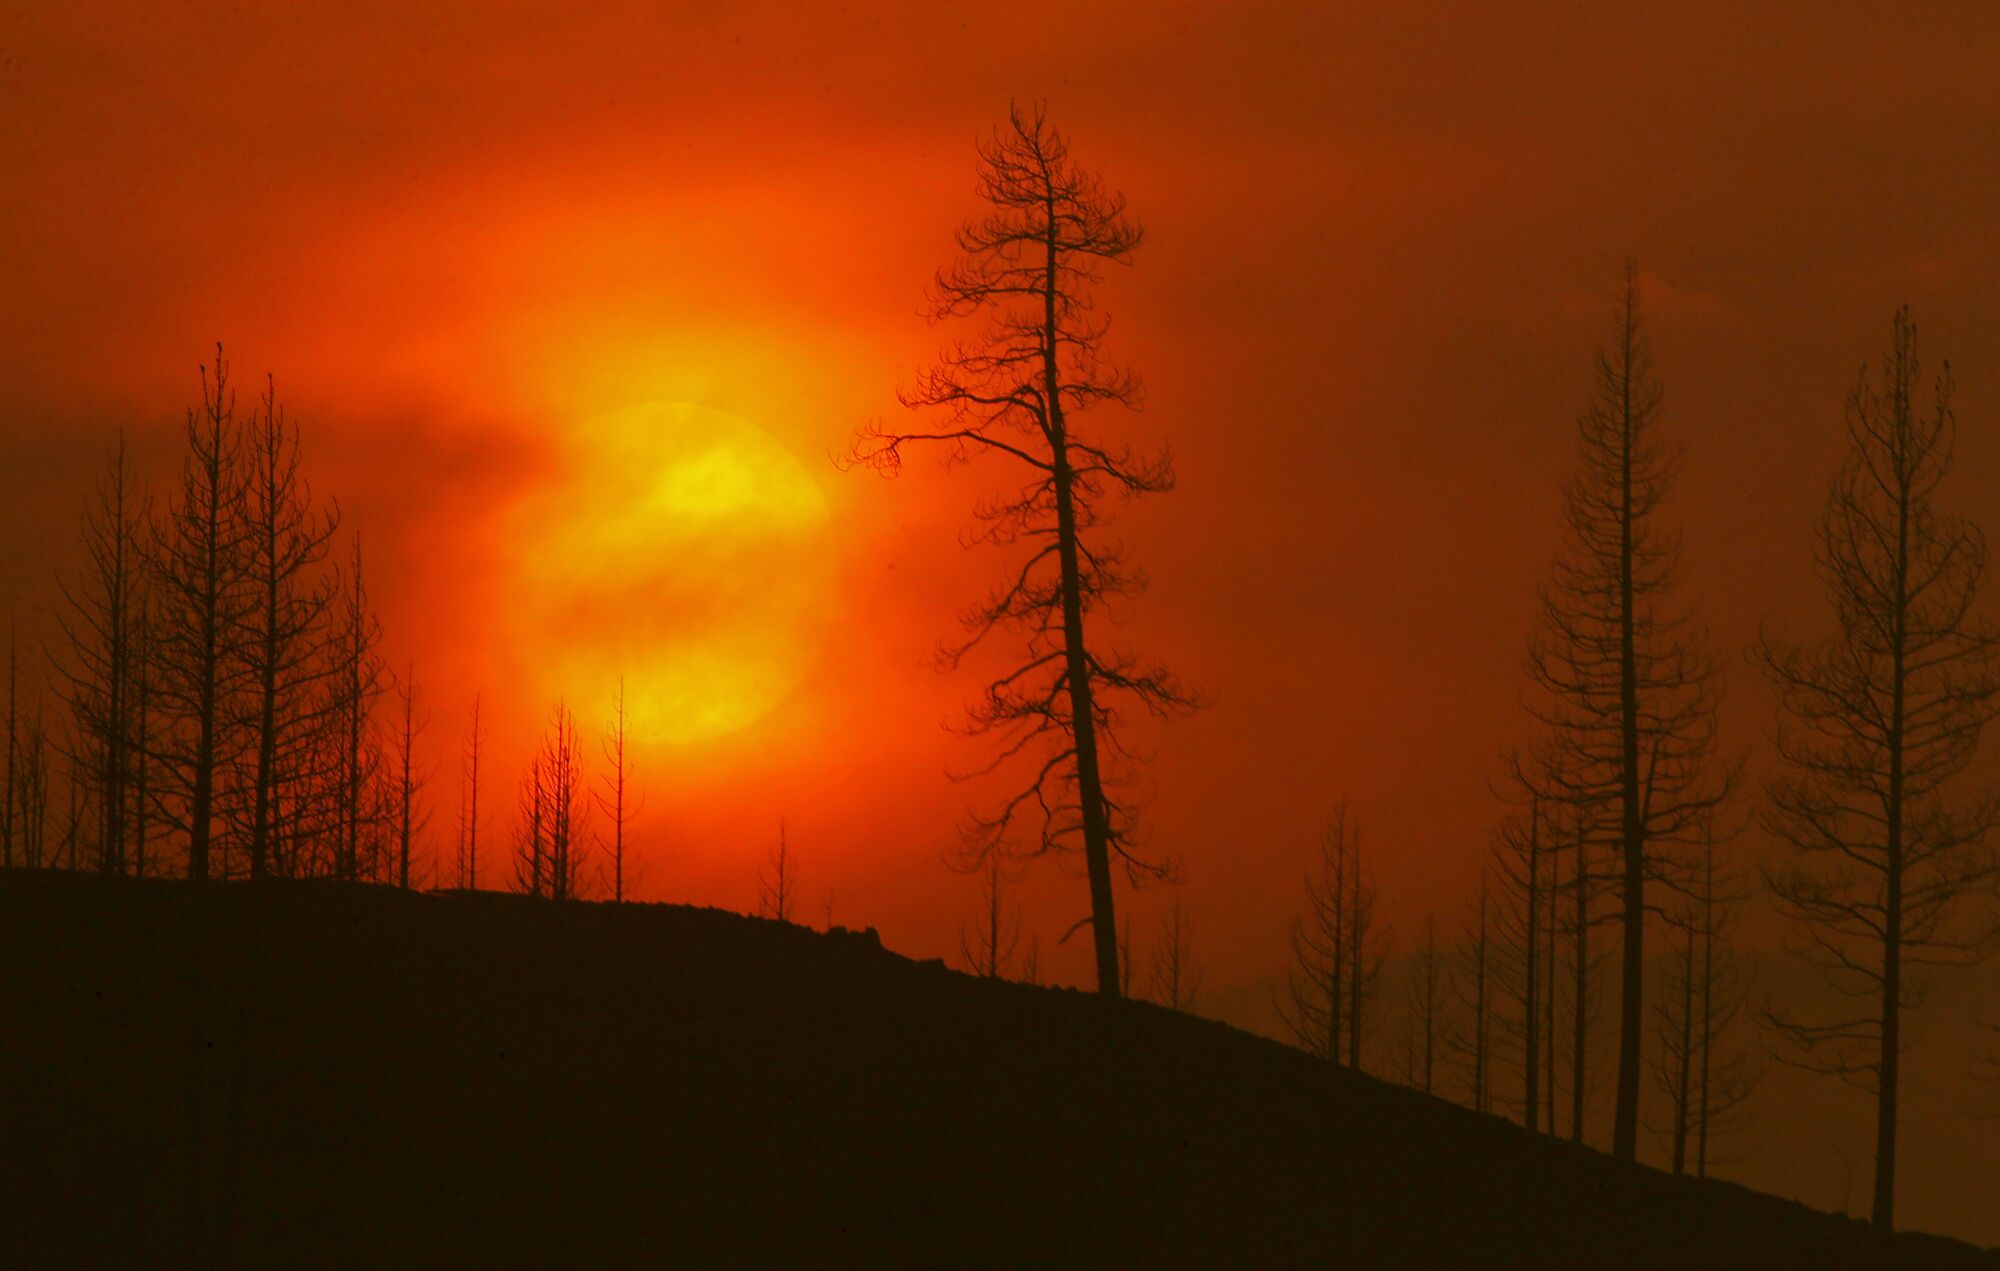 Smoke obscures the sun as it sets on the burn zone of the McKinney fire near Yreka. 